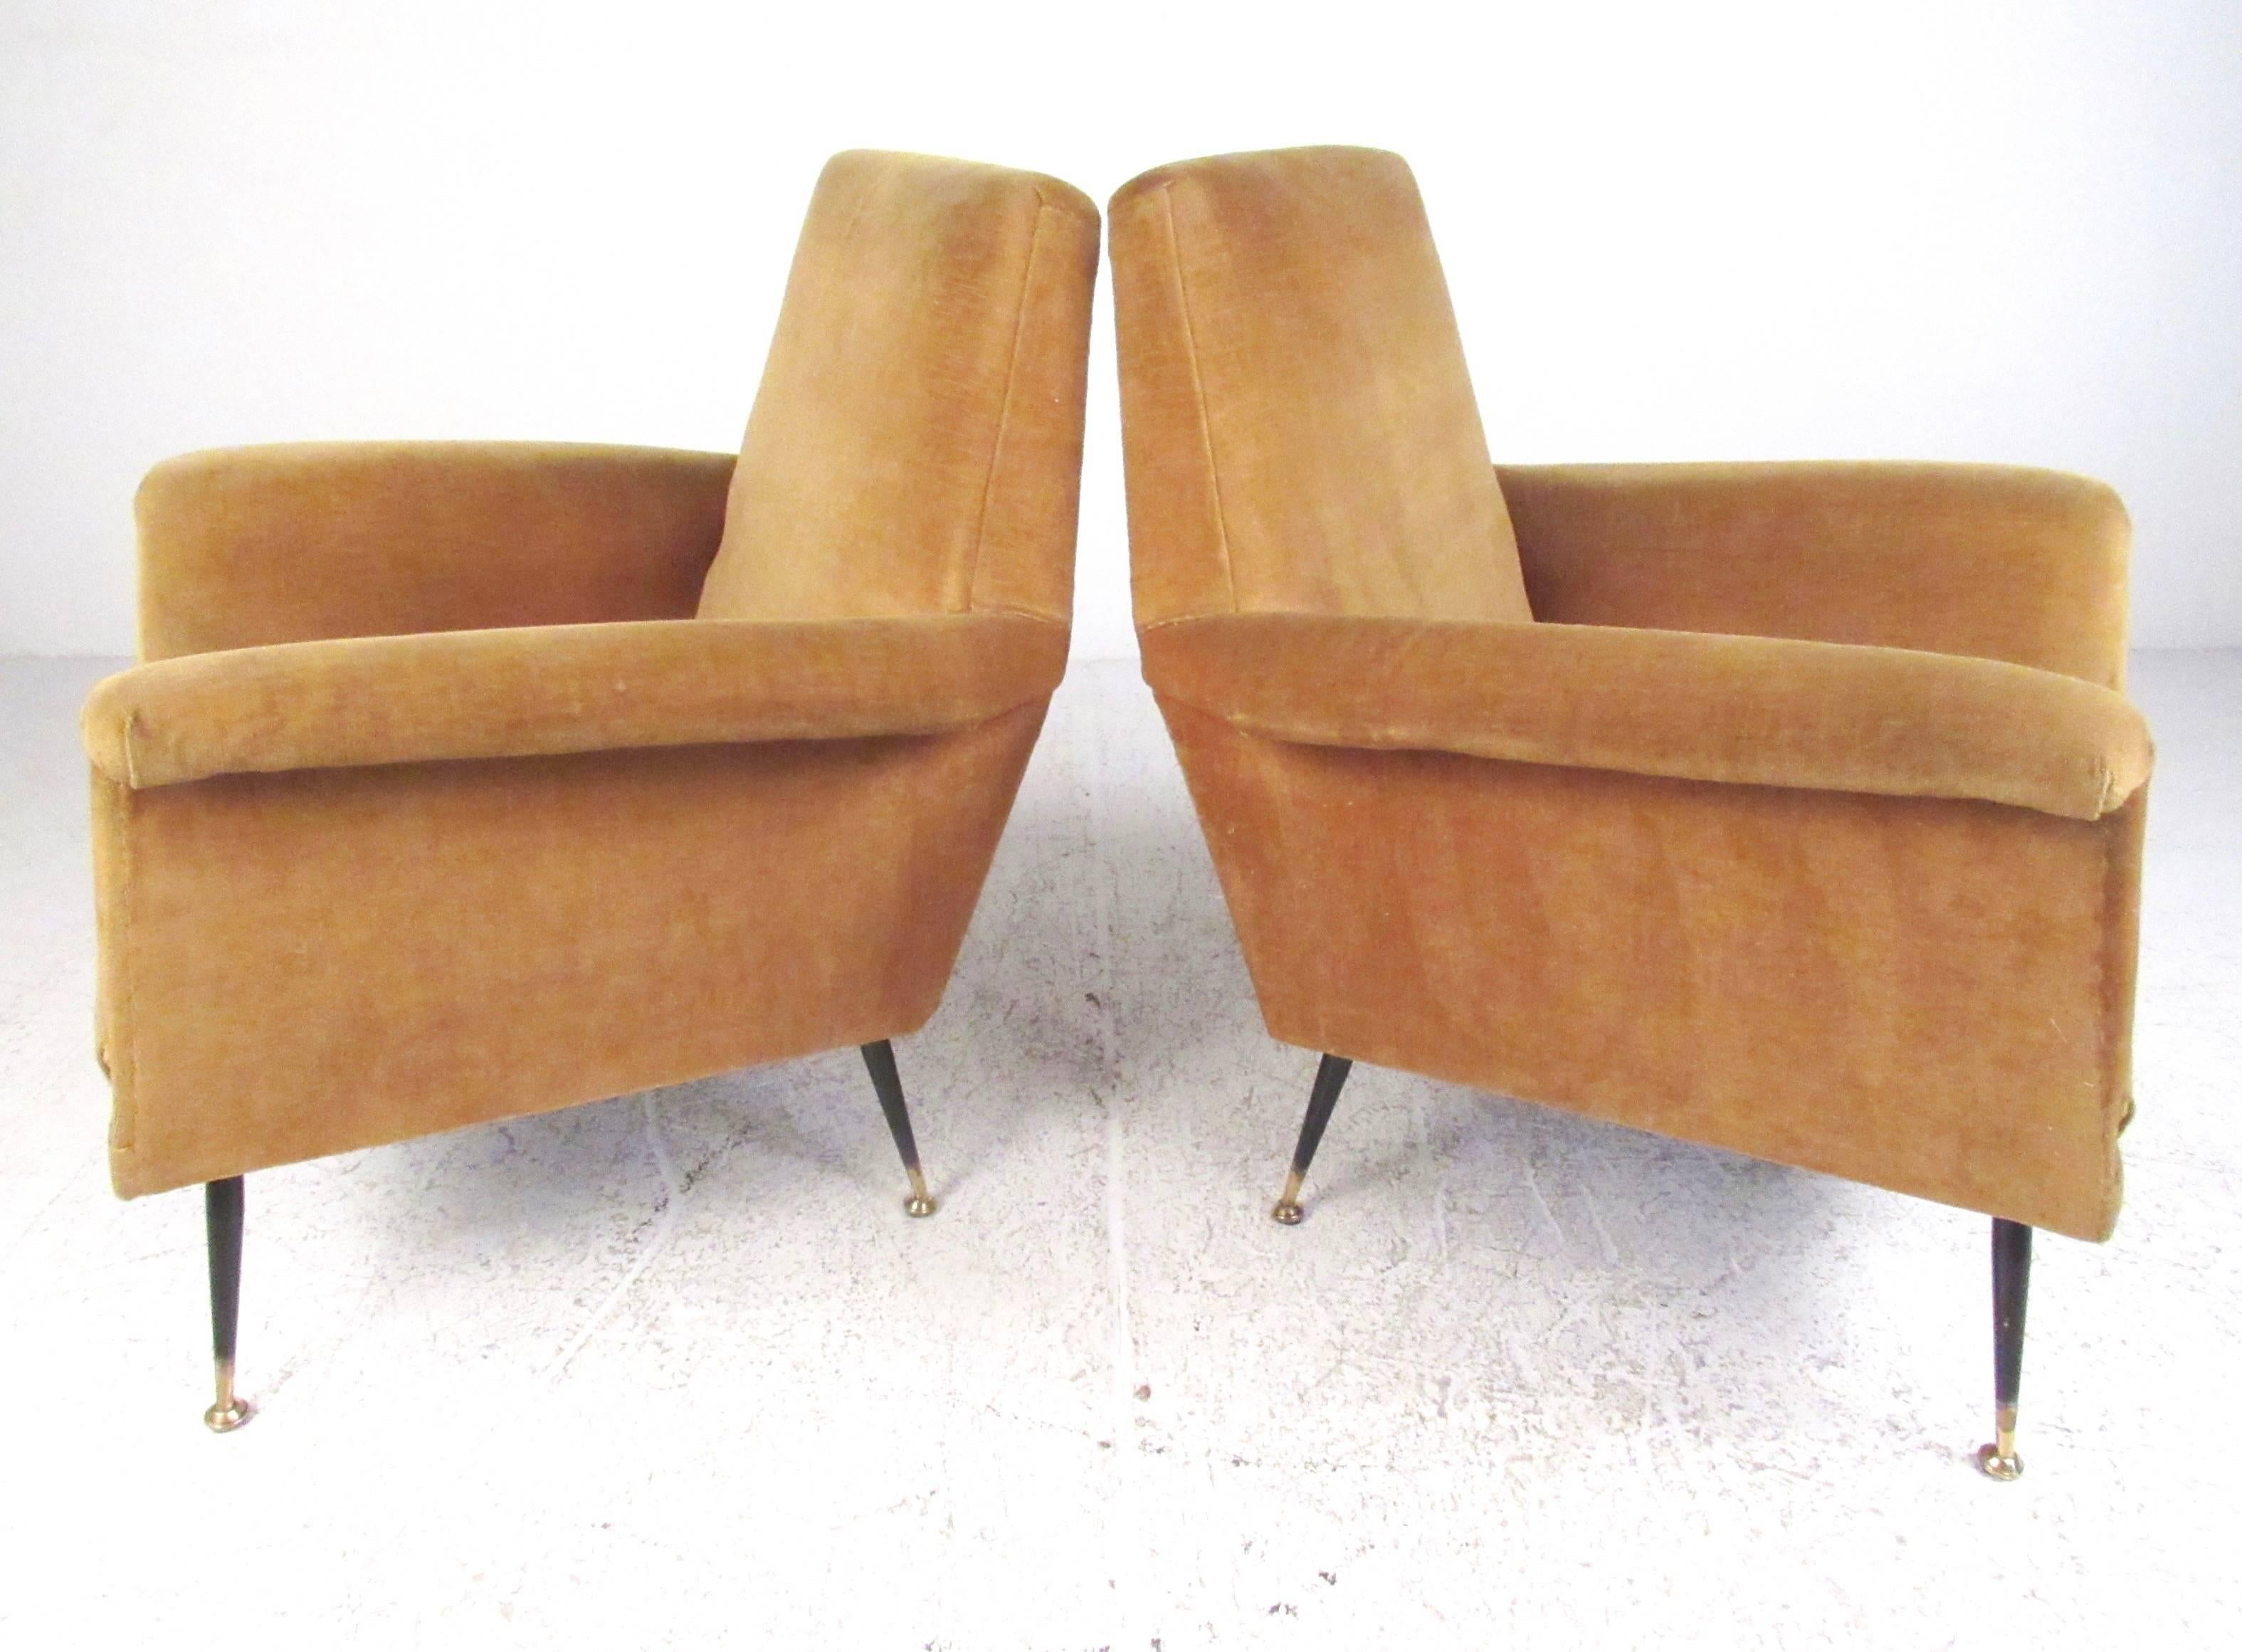 This beautiful sculpted pair of 1950s Italian modern armchairs feature tapered legs with brass tipped feet. Unique arm rests and comfortably padded seating makes this vintage pair of Marco Zanuso style club chairs an impressive mid-century addition